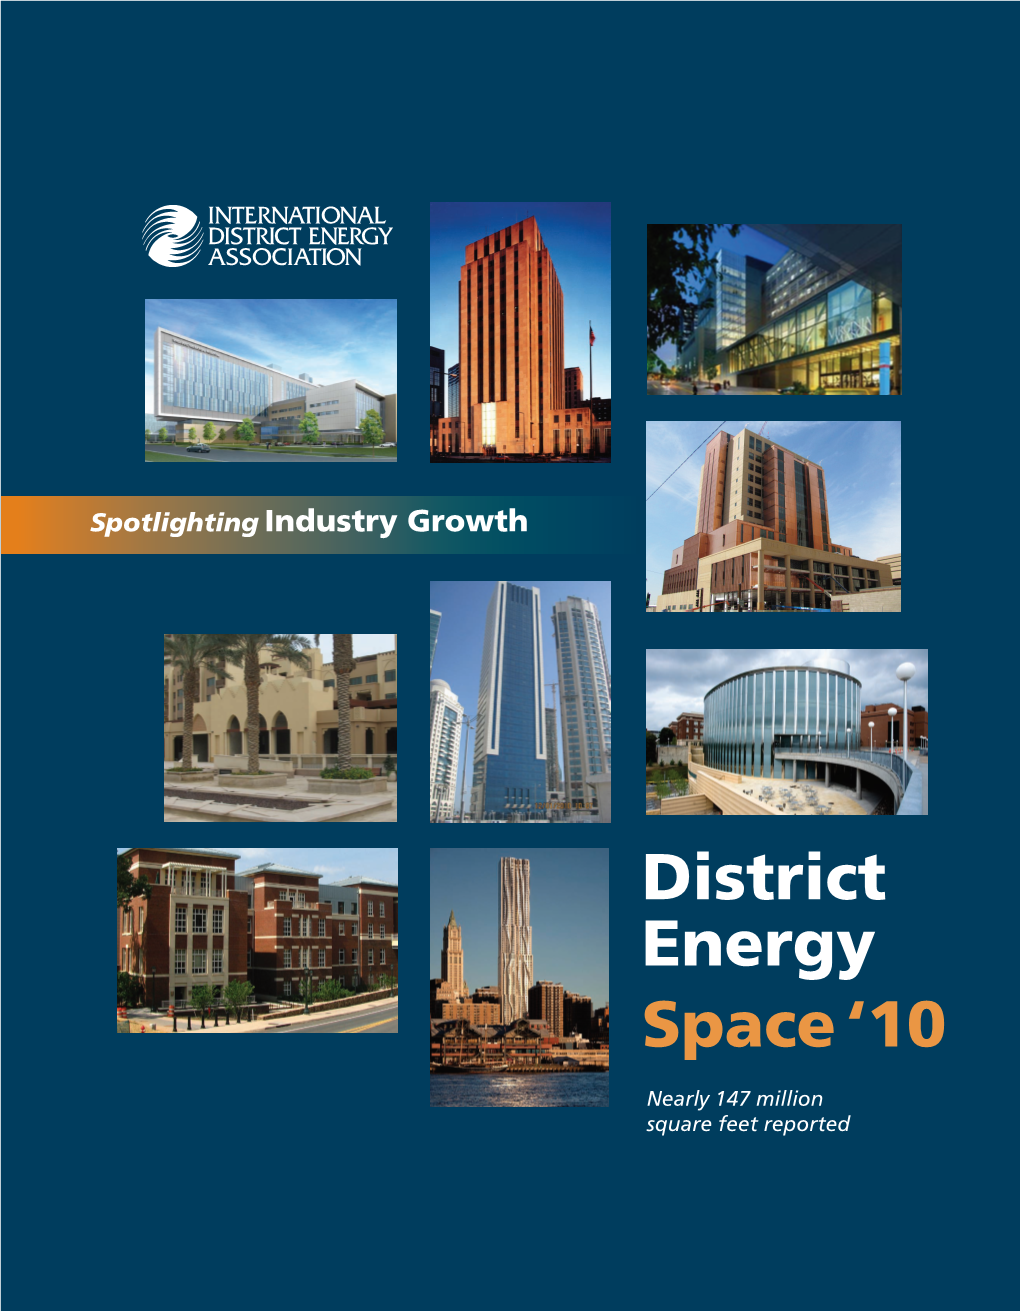 District Energy Space ‘10